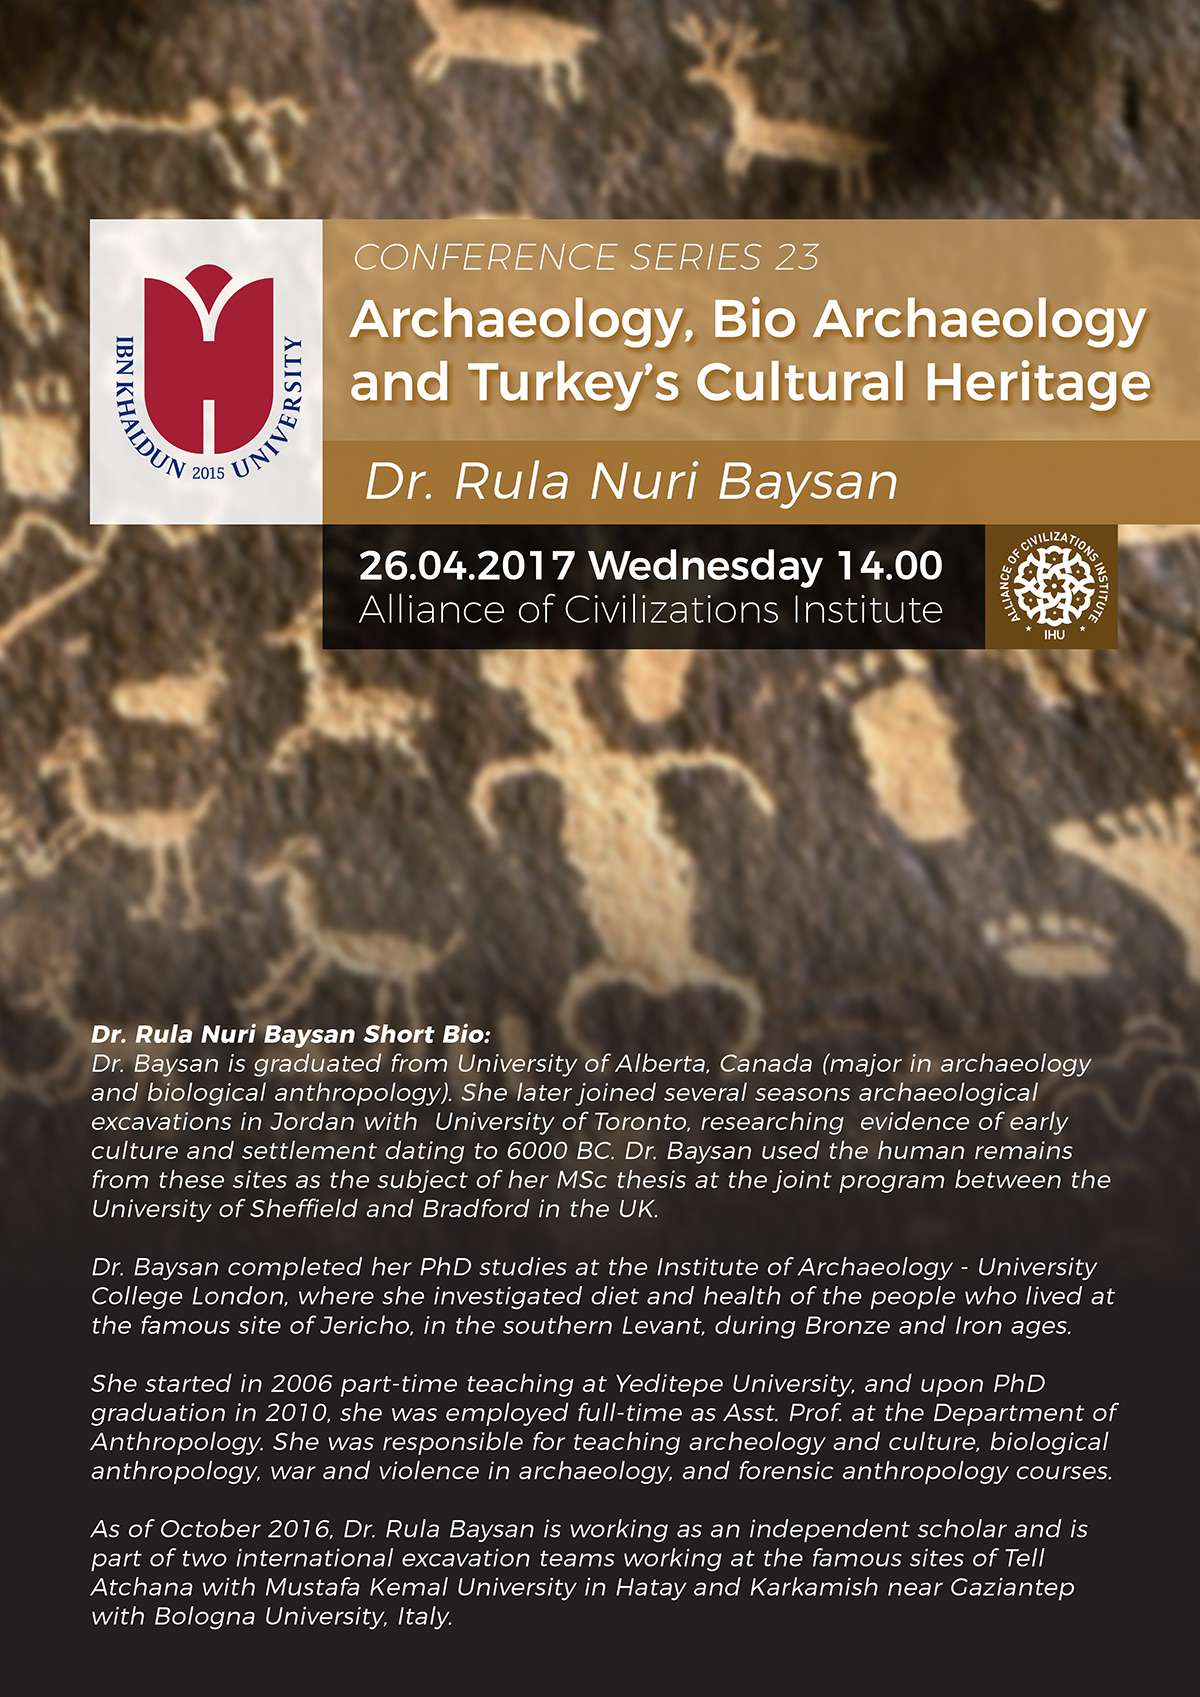 Archaeology, Bio Archaeology and Turkey’s Cultural Heritage